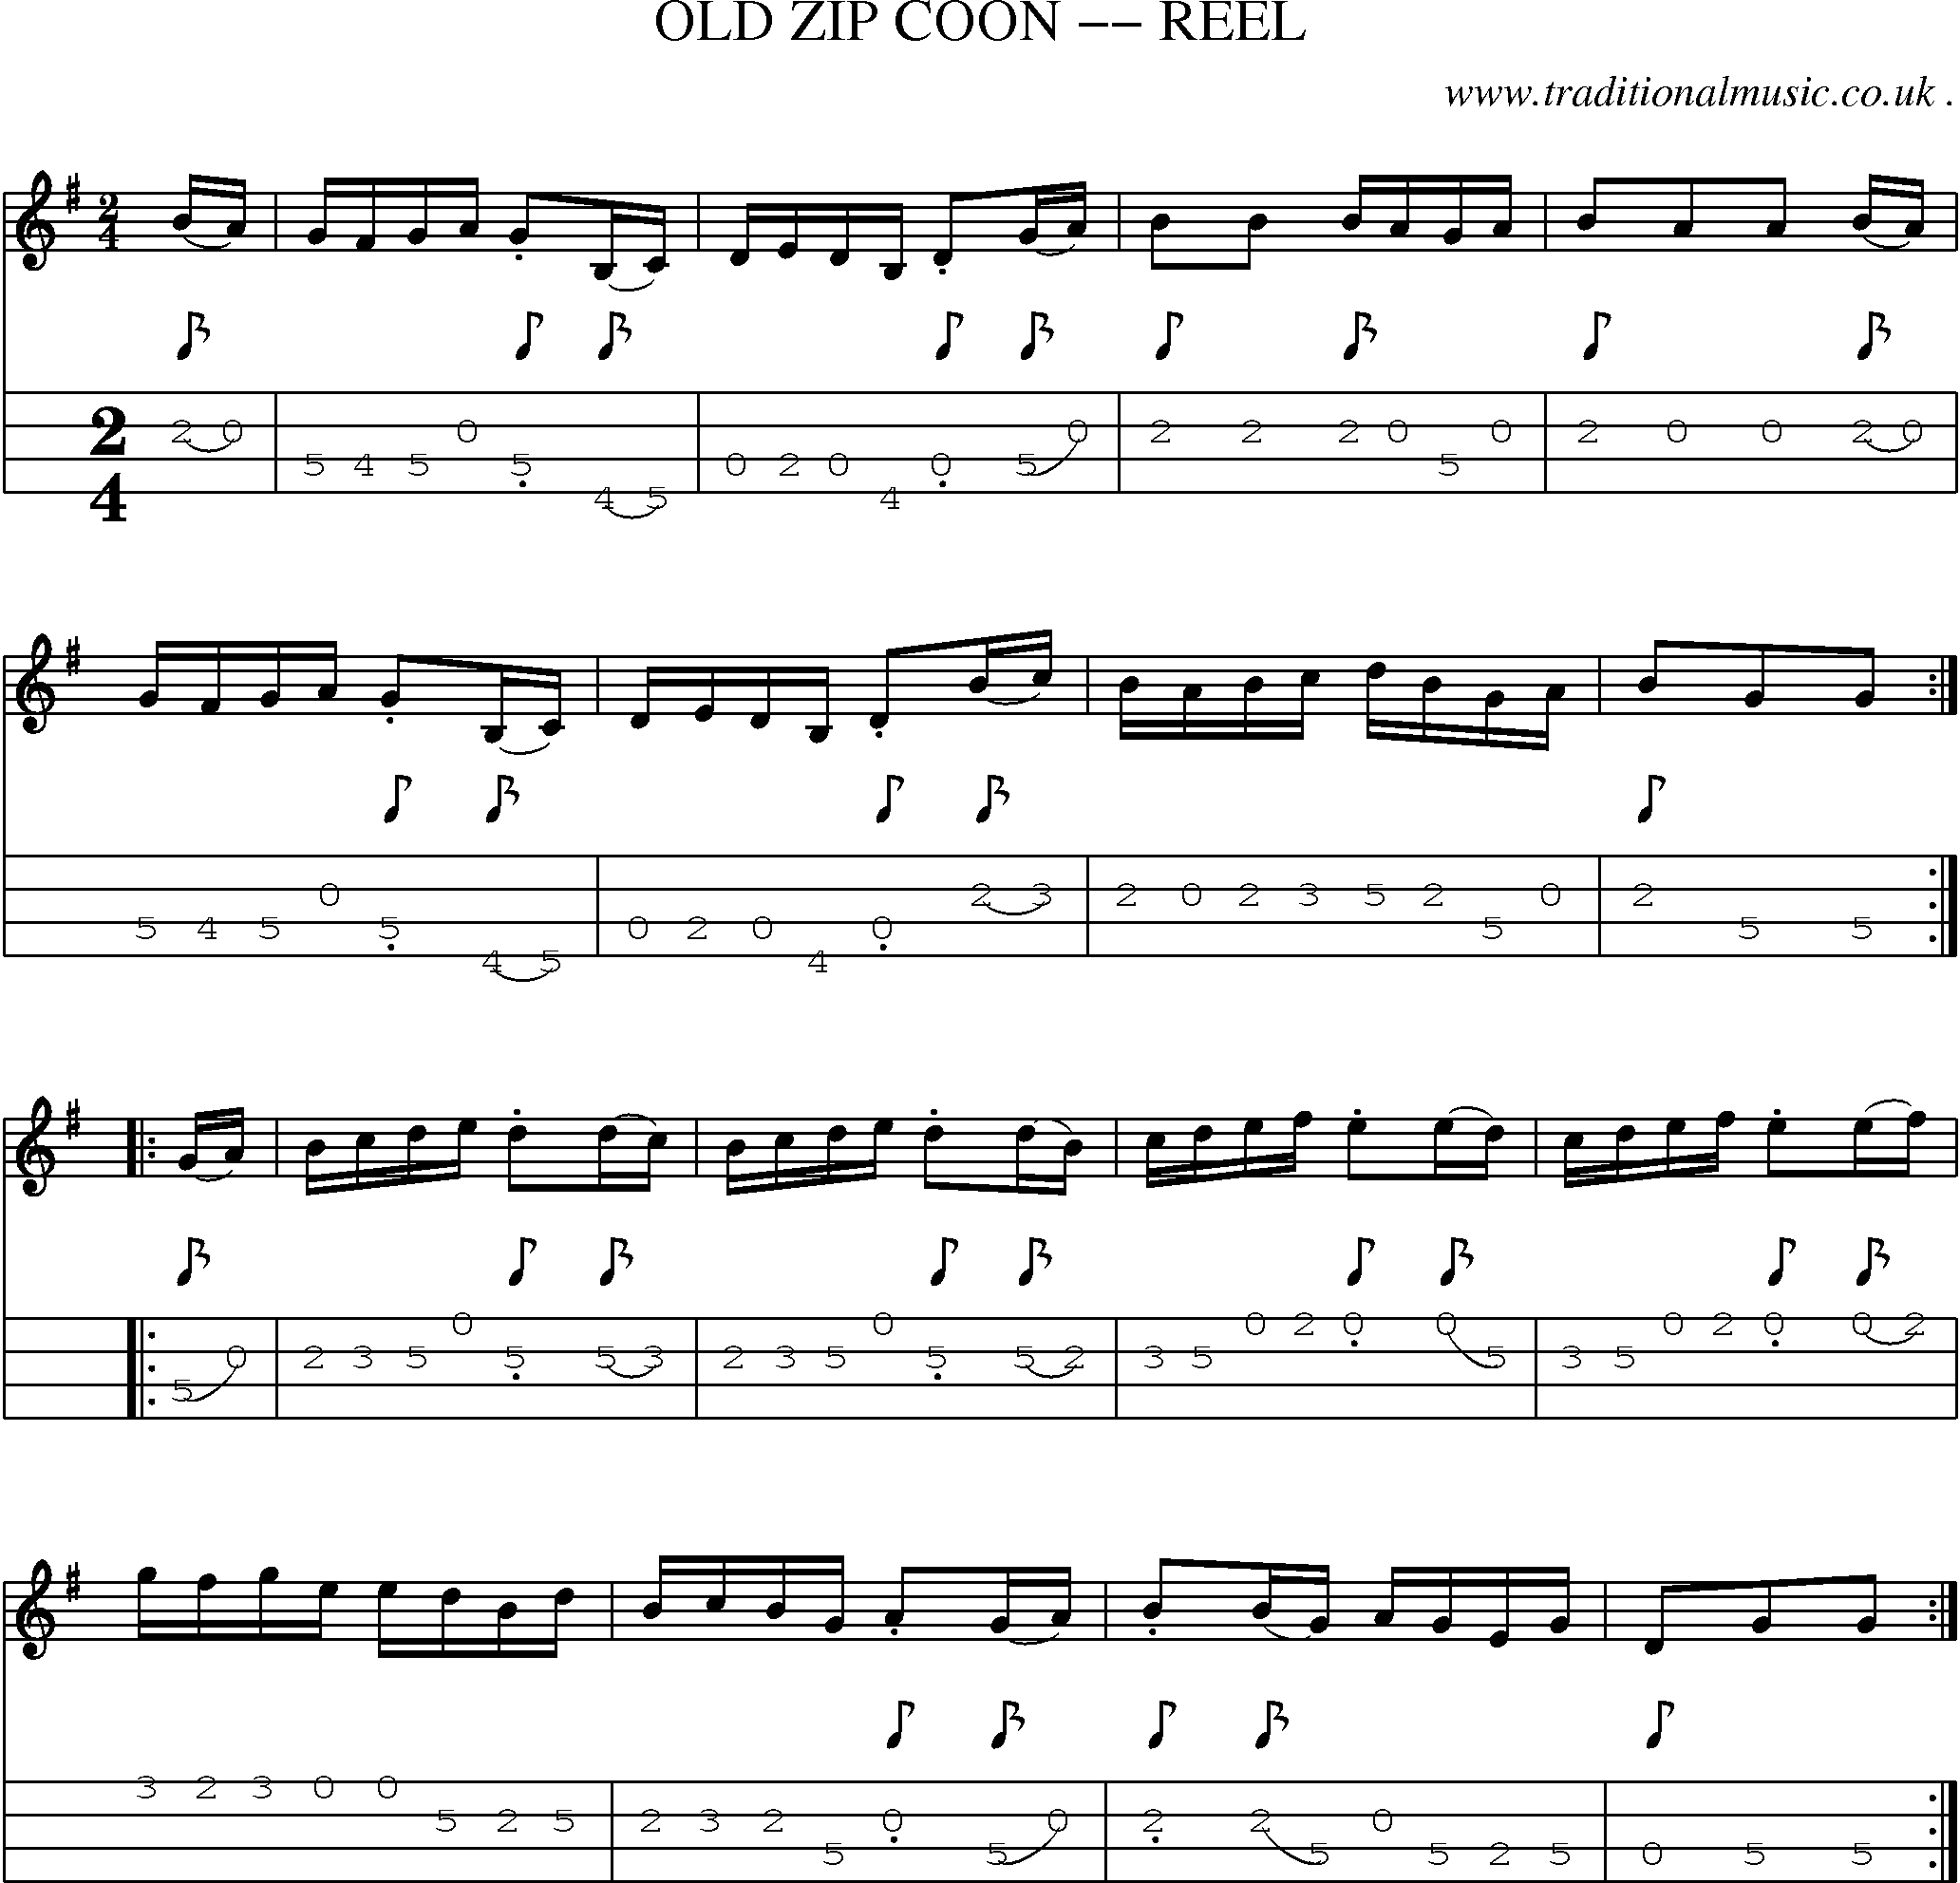 Music Score and Guitar Tabs for Old Zip Coon Reel